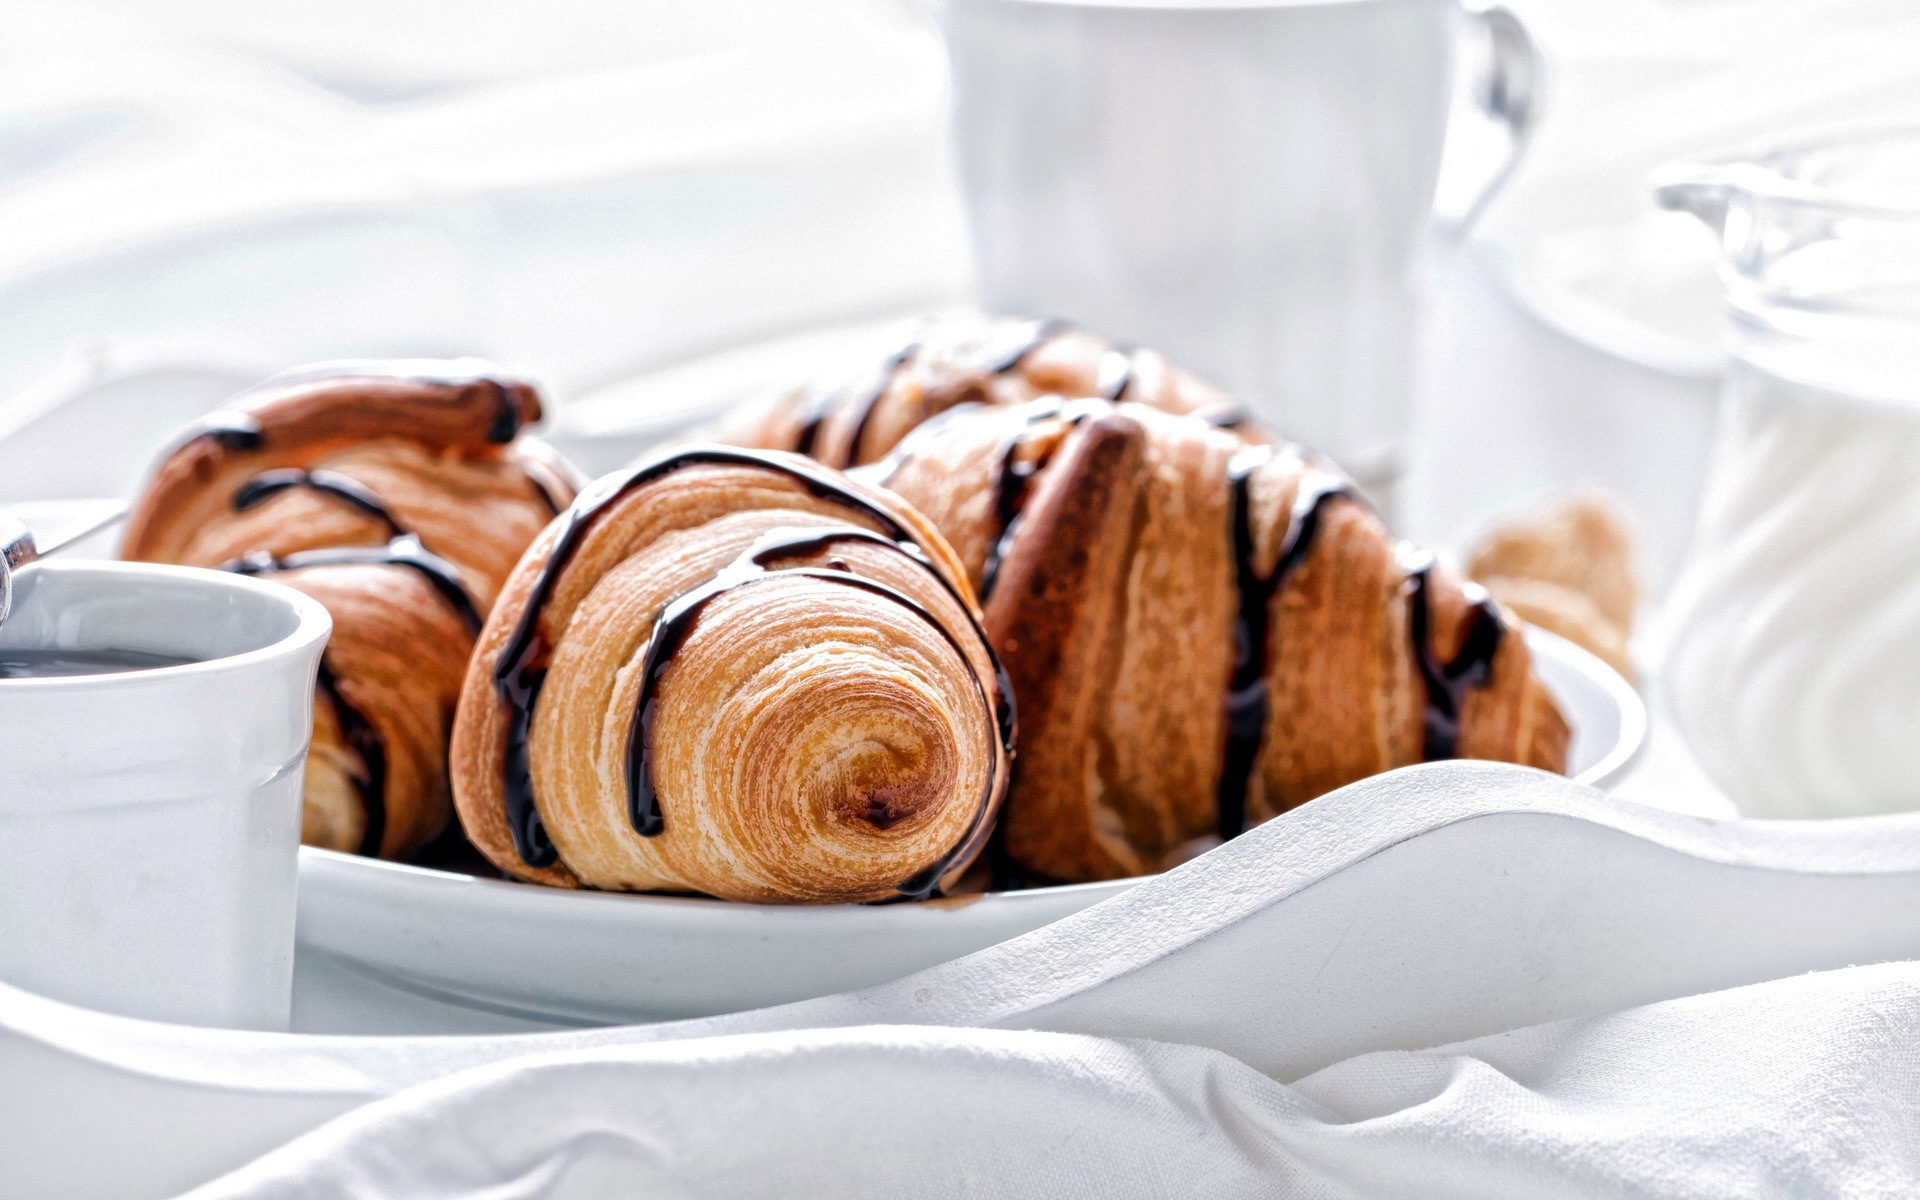 Croissant: Referred to as "viennoiseries" due to the Austrian origins. 1920x1200 HD Wallpaper.